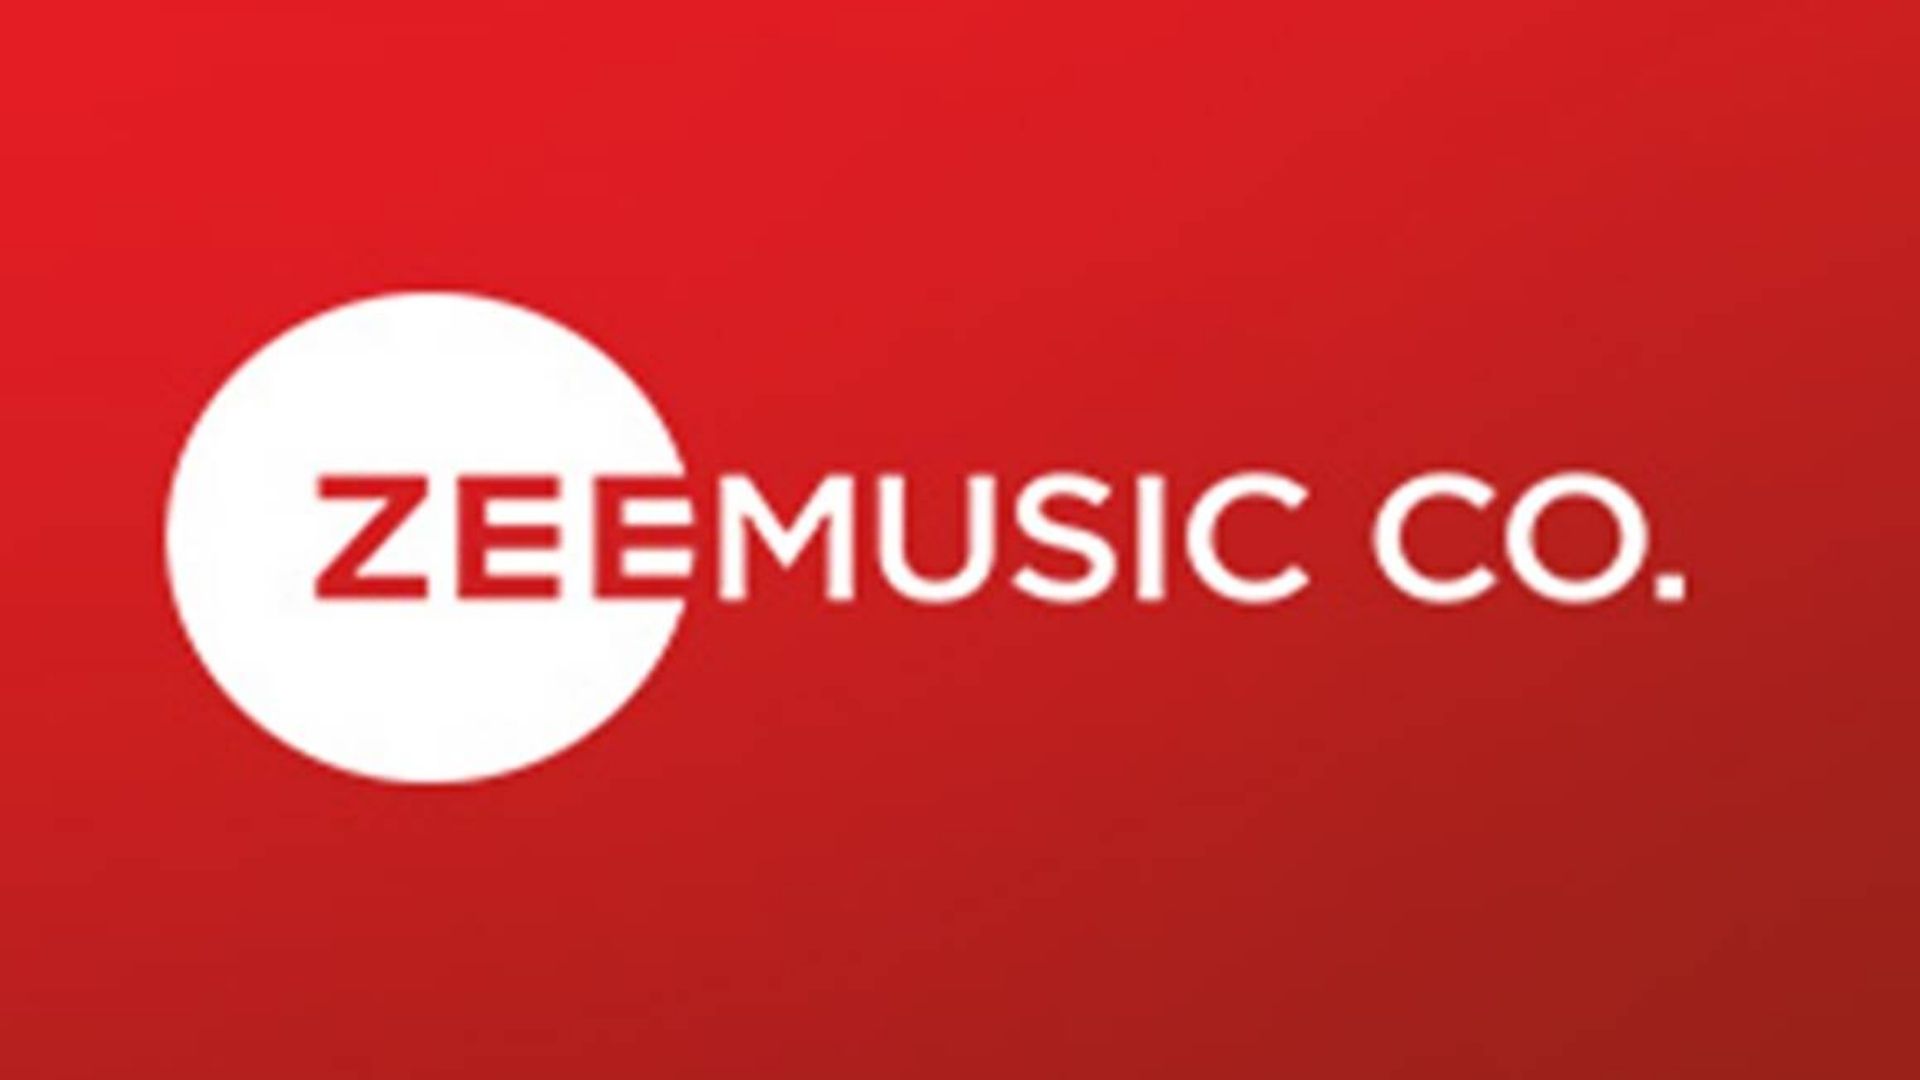 zee music co inks global licensing deal with moj & sharechat - exchange4media